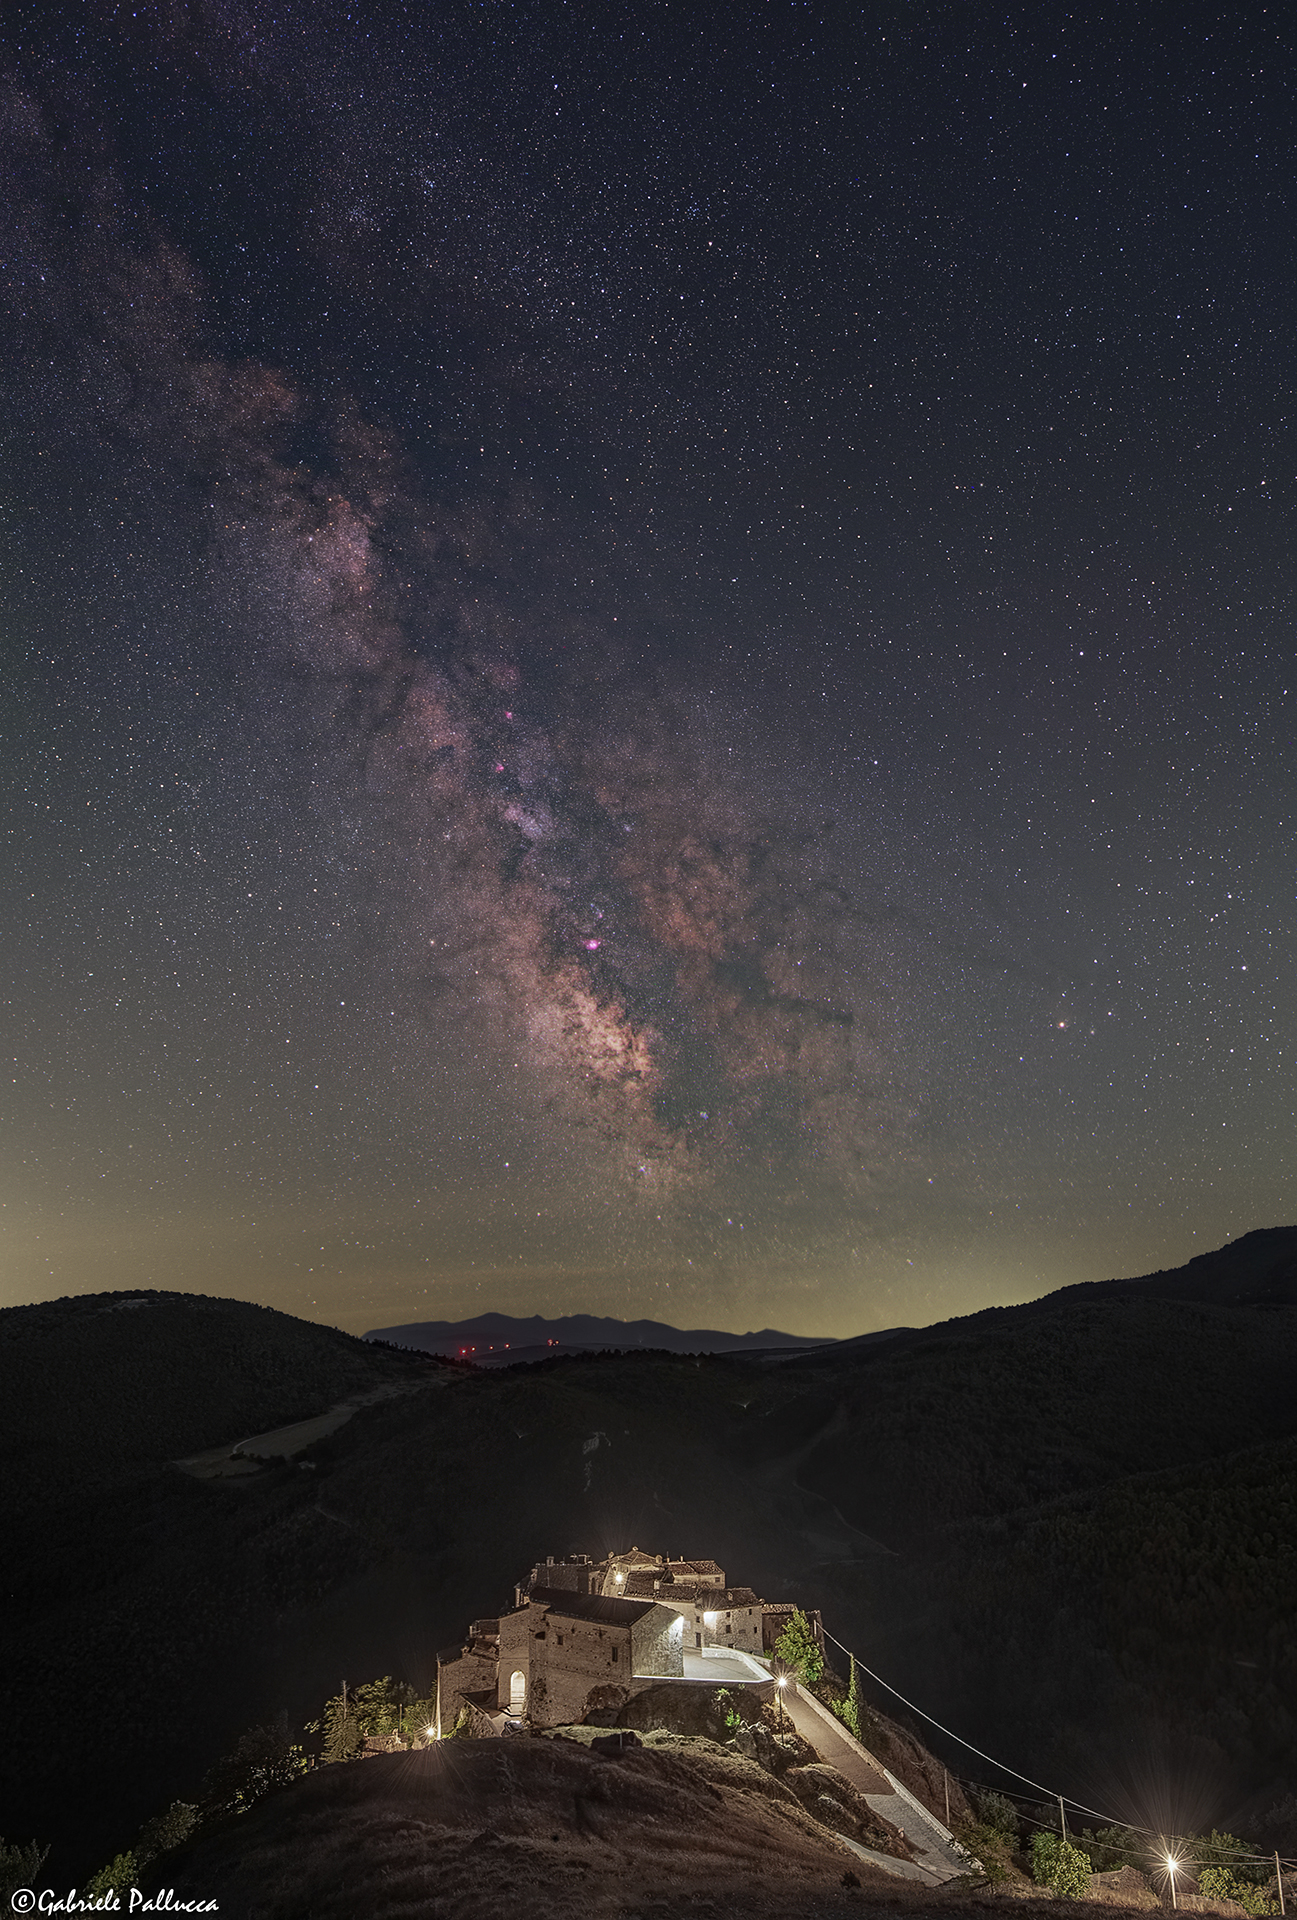 Elcito, and the Milky Way...